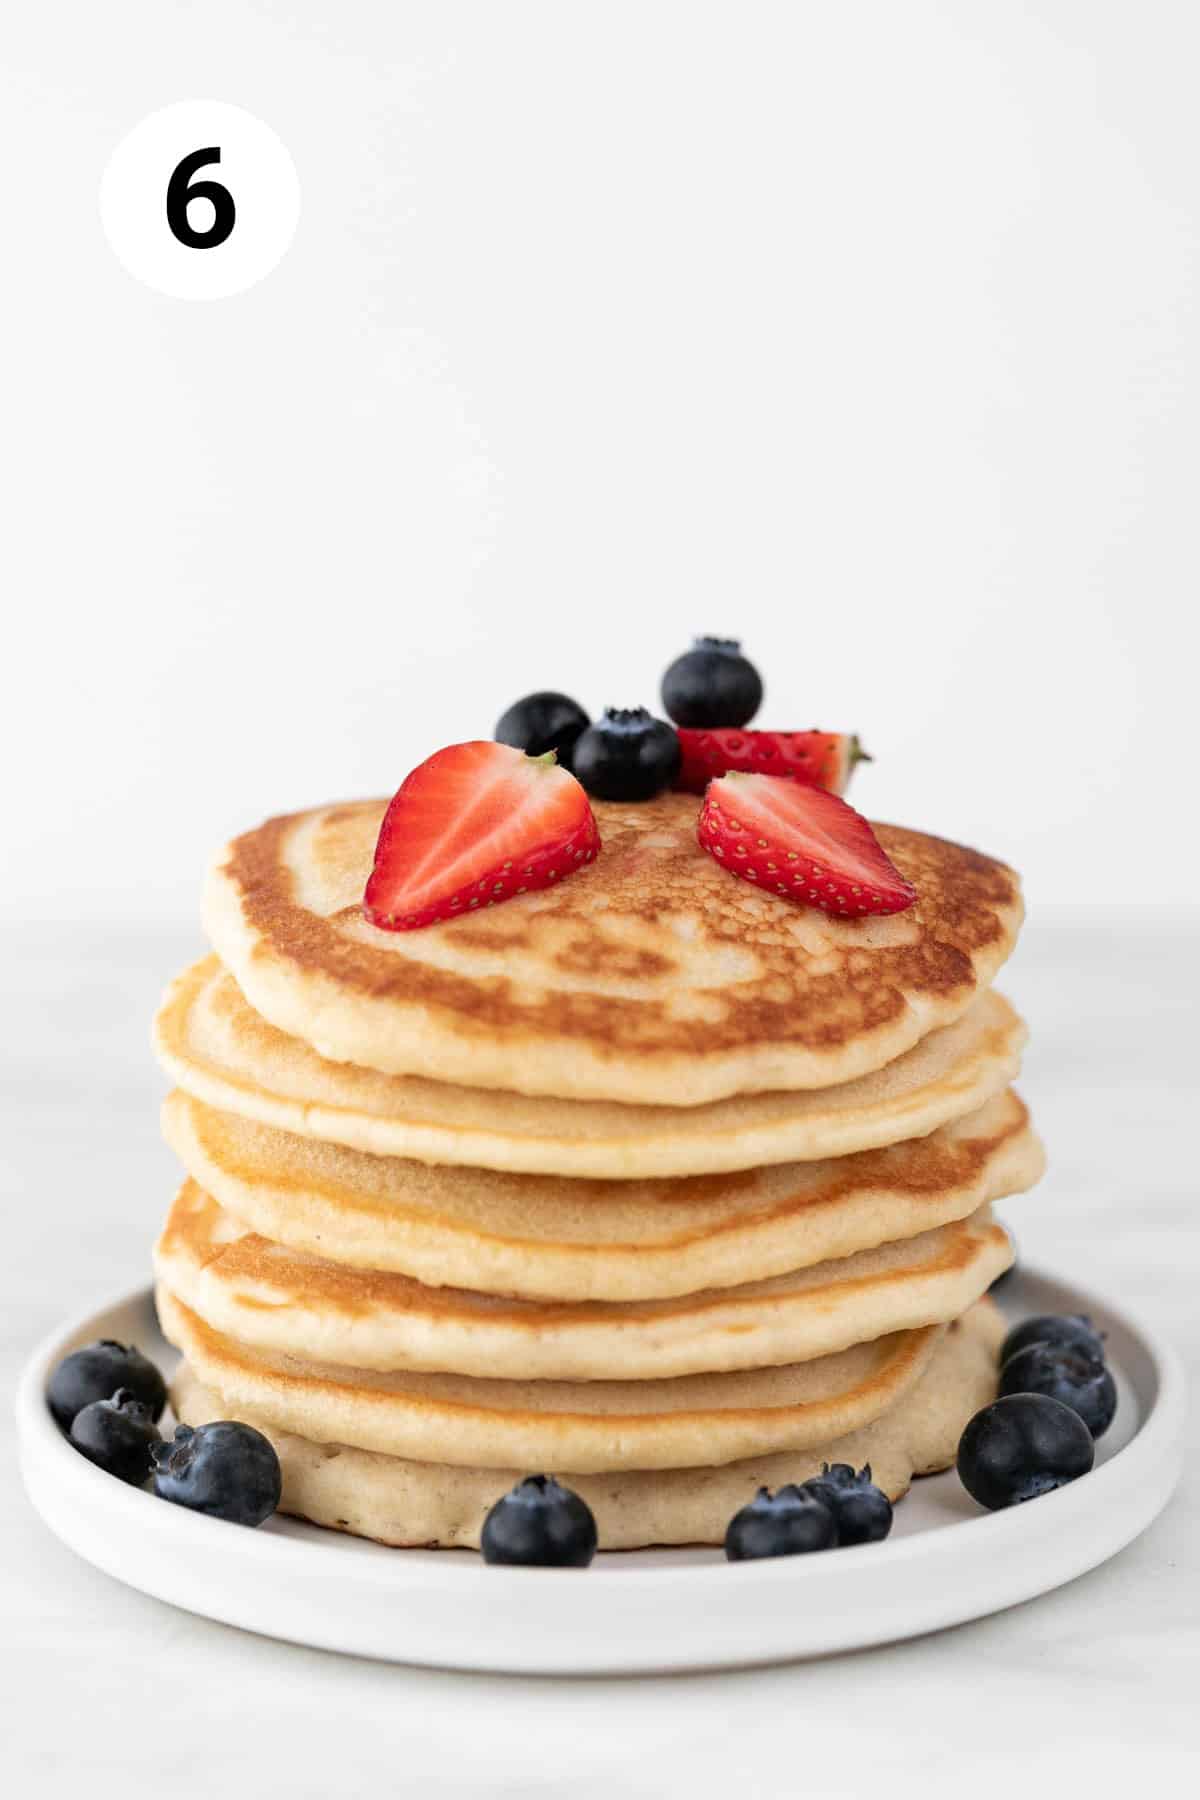 Stack of vegan pancakes topped with fresh strawberries and blueberries.